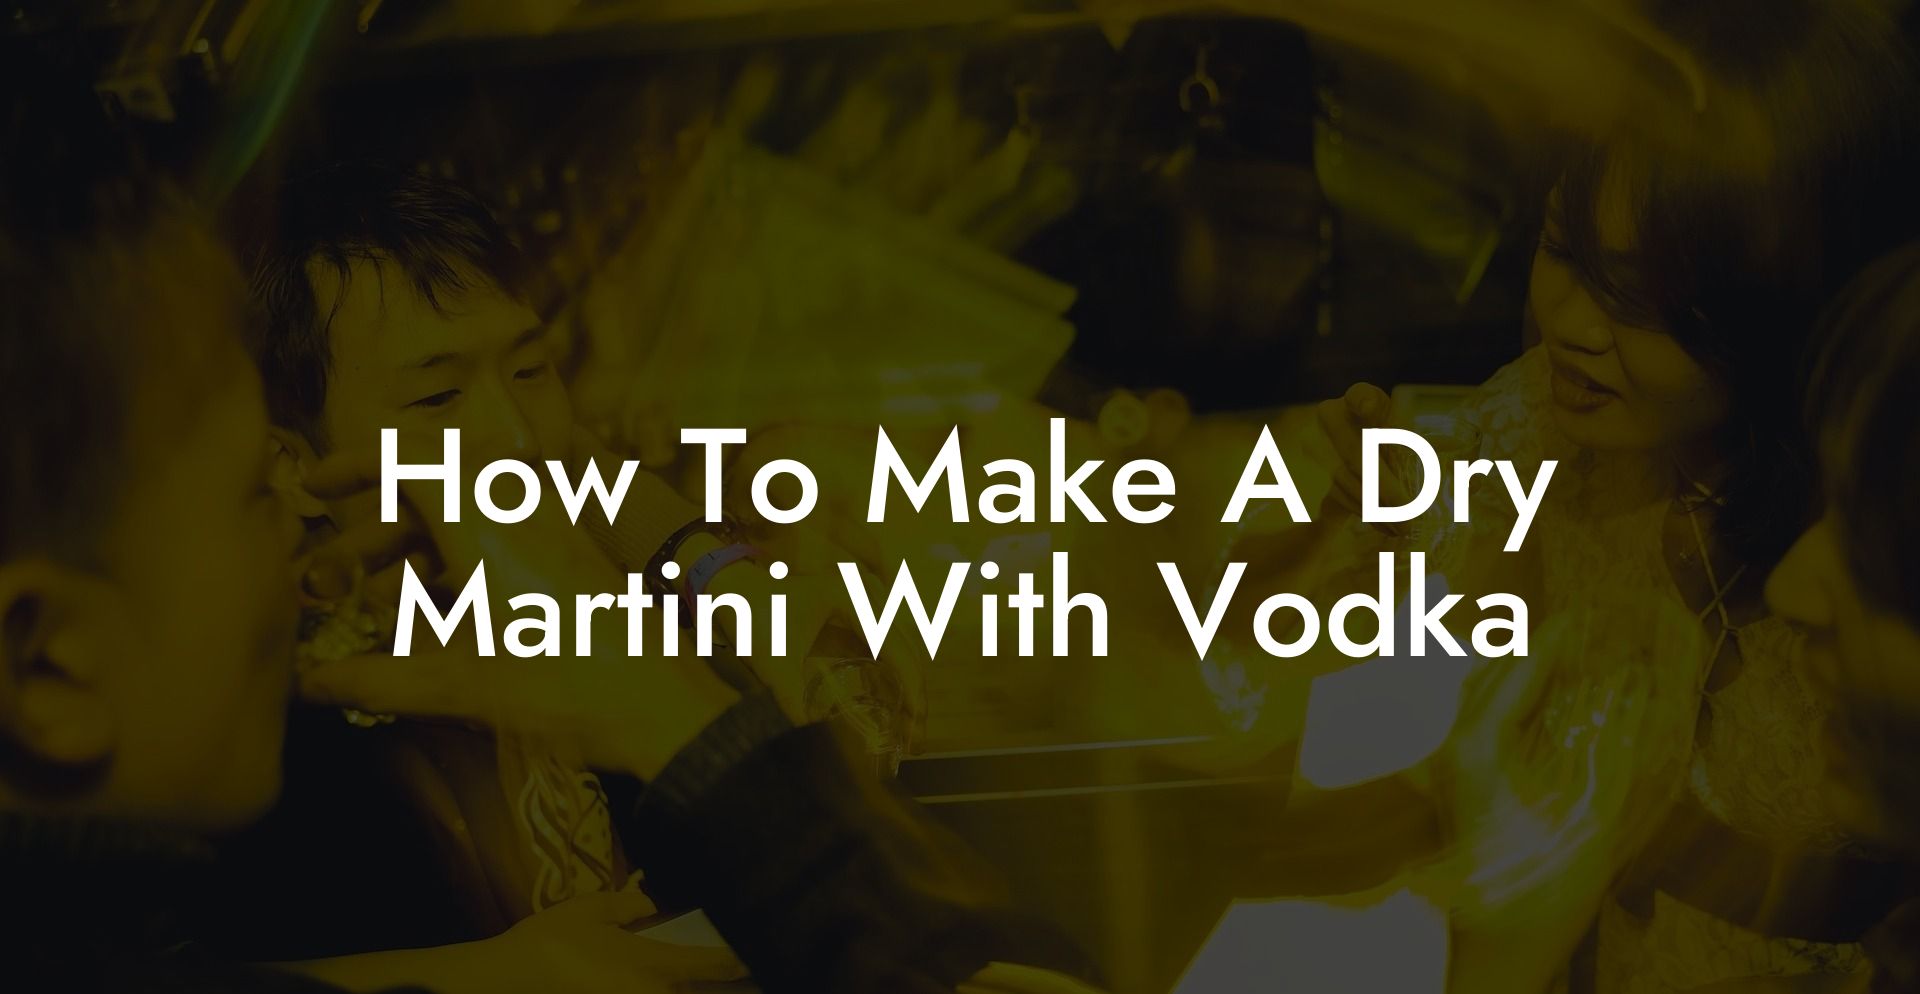 How To Make A Dry Martini With Vodka